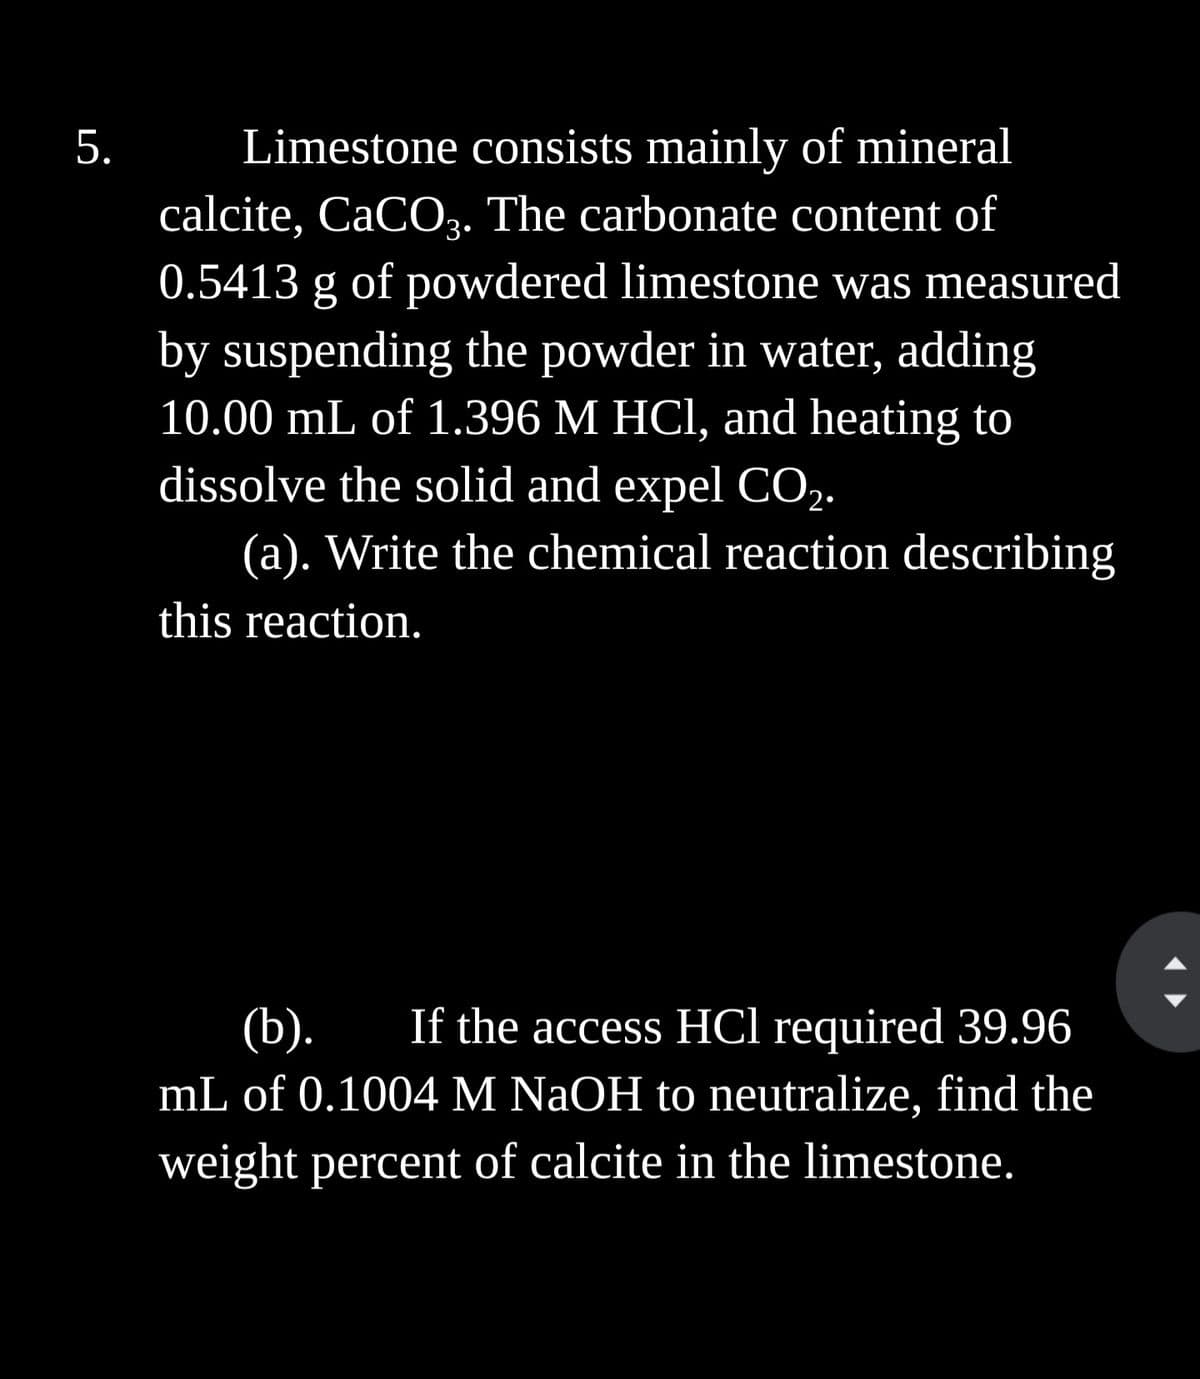 5.
Limestone consists mainly of mineral
calcite, CaCO3. The carbonate content of
0.5413 g of powdered limestone was measured
by suspending the powder in water, adding
10.00 mL of 1.396 M HCl, and heating to
dissolve the solid and expel CO₂.
(a). Write the chemical reaction describing
this reaction.
(b). If the access HCl required 39.96
mL of 0.1004 M NaOH to neutralize, find the
weight percent of calcite in the limestone.